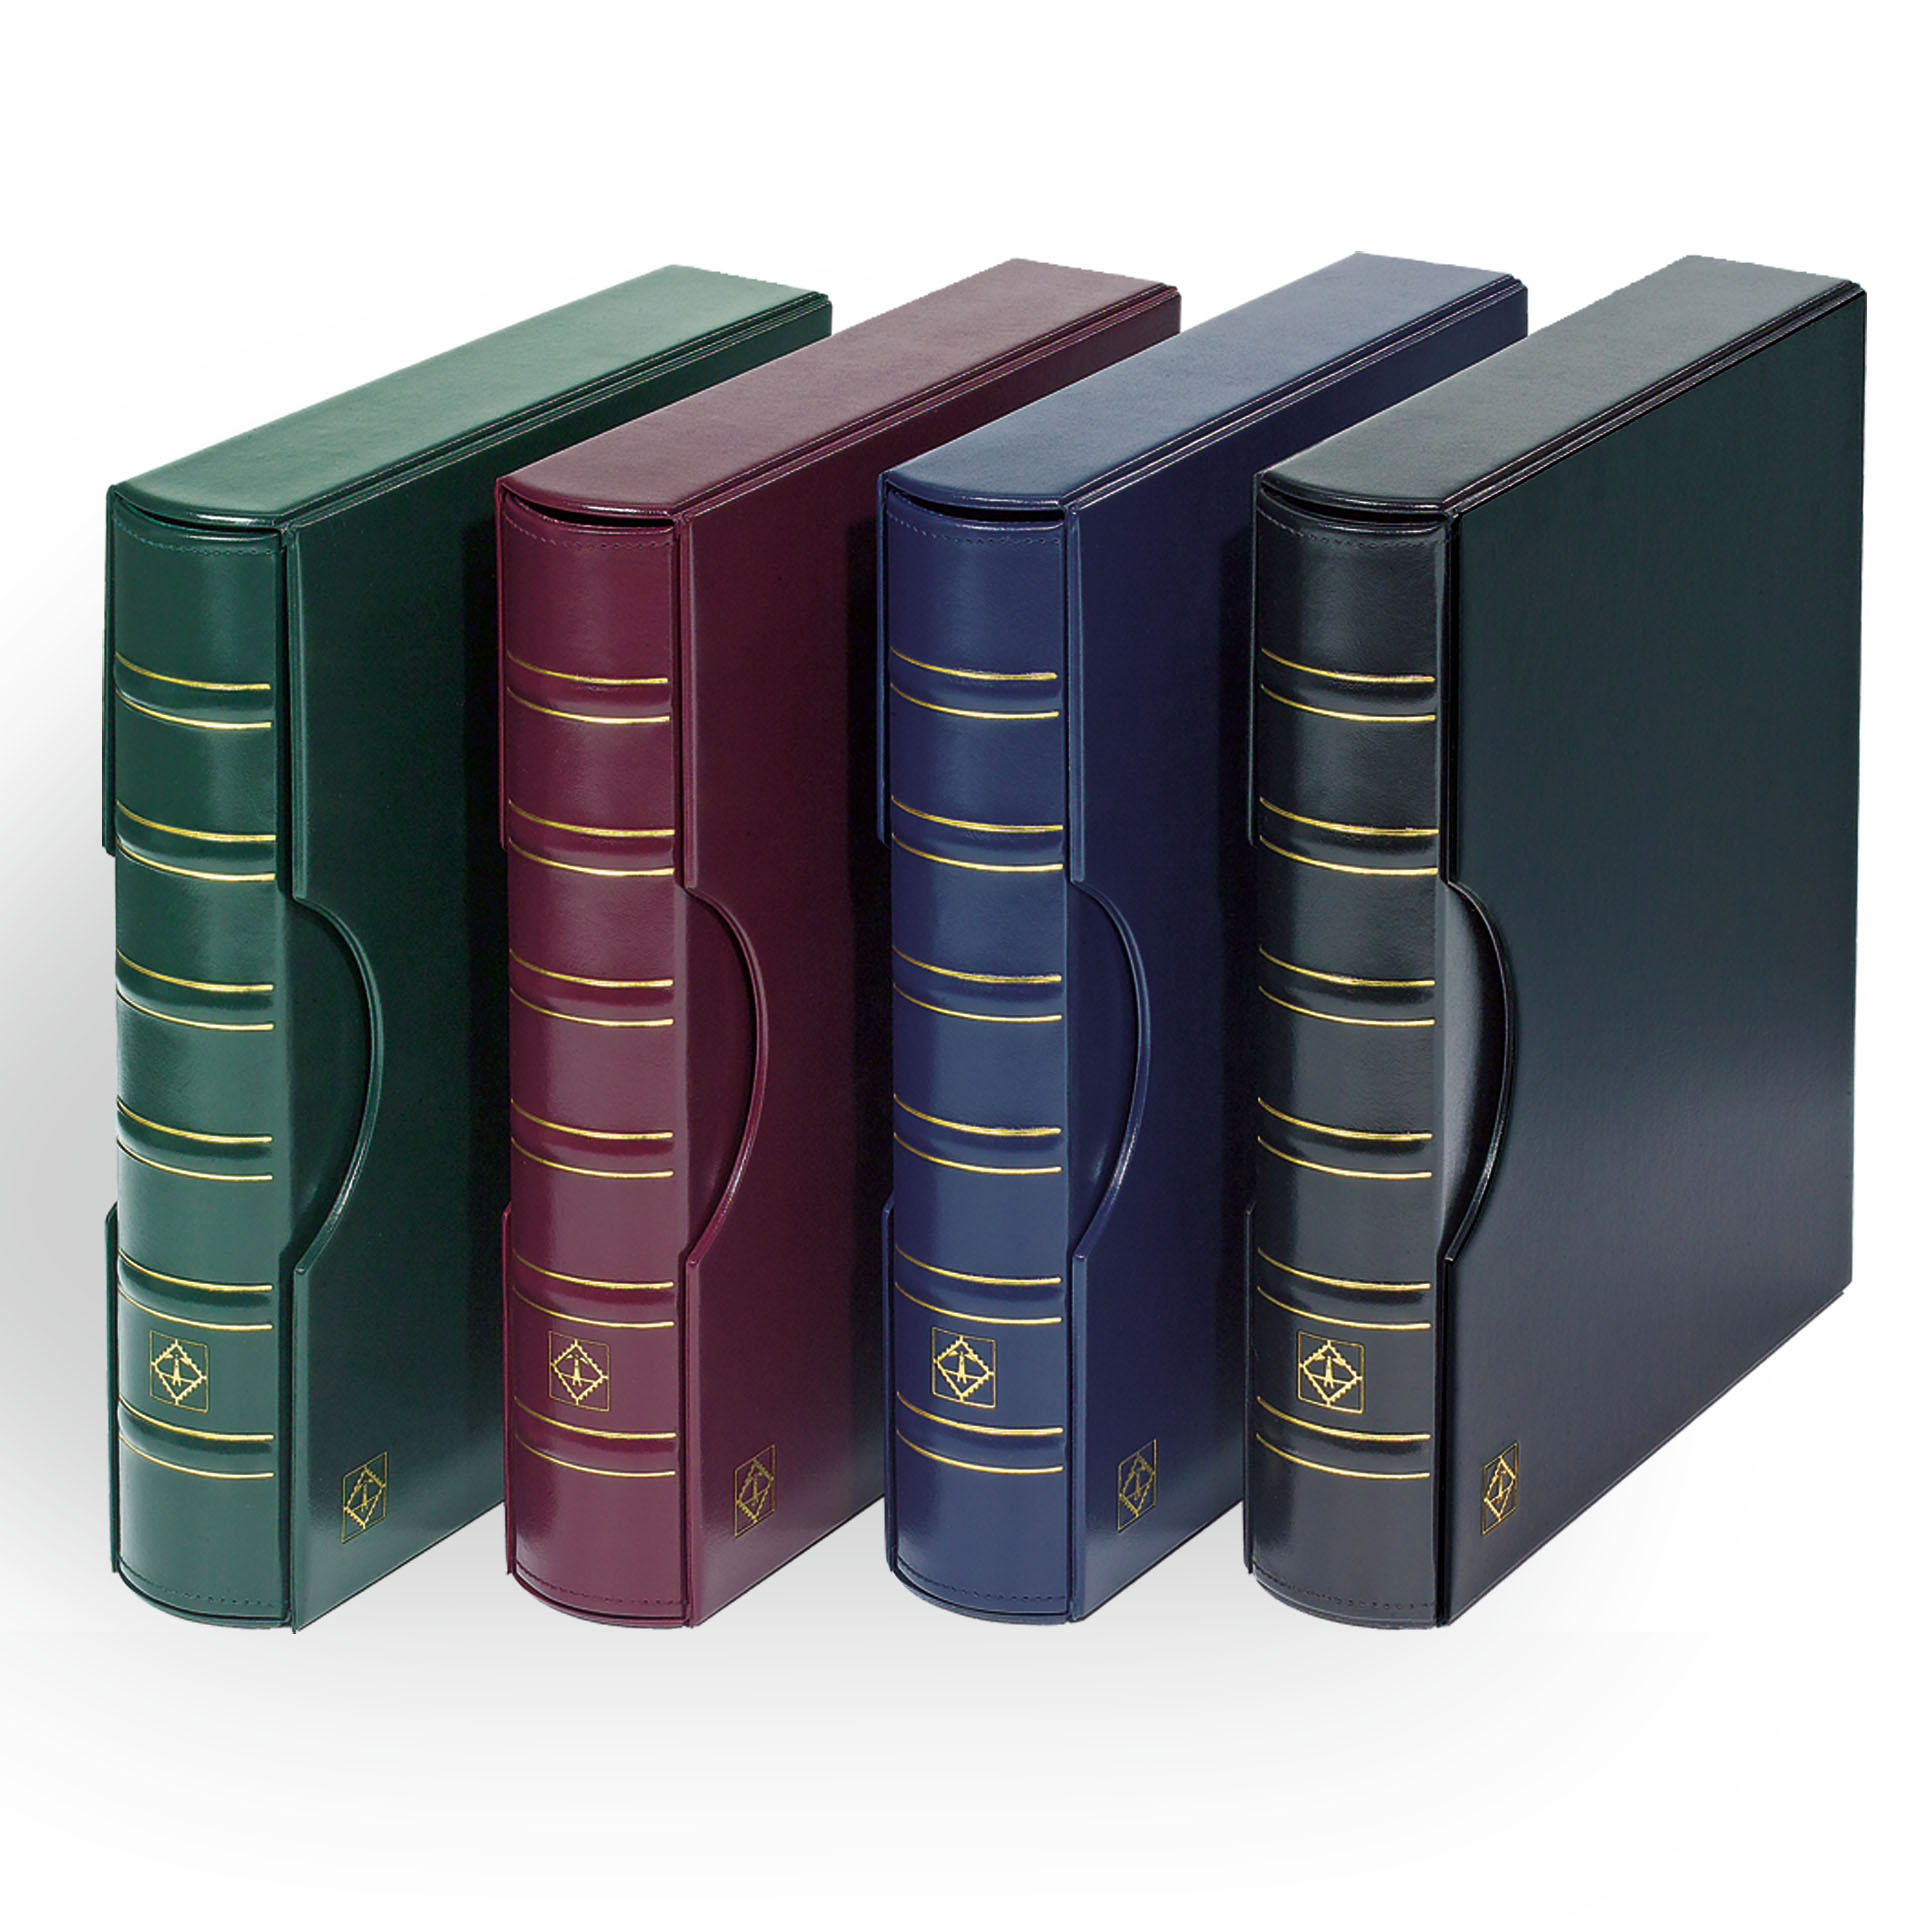 Turn-bar binder PERFECT DP, incl. classic design with slipcase online